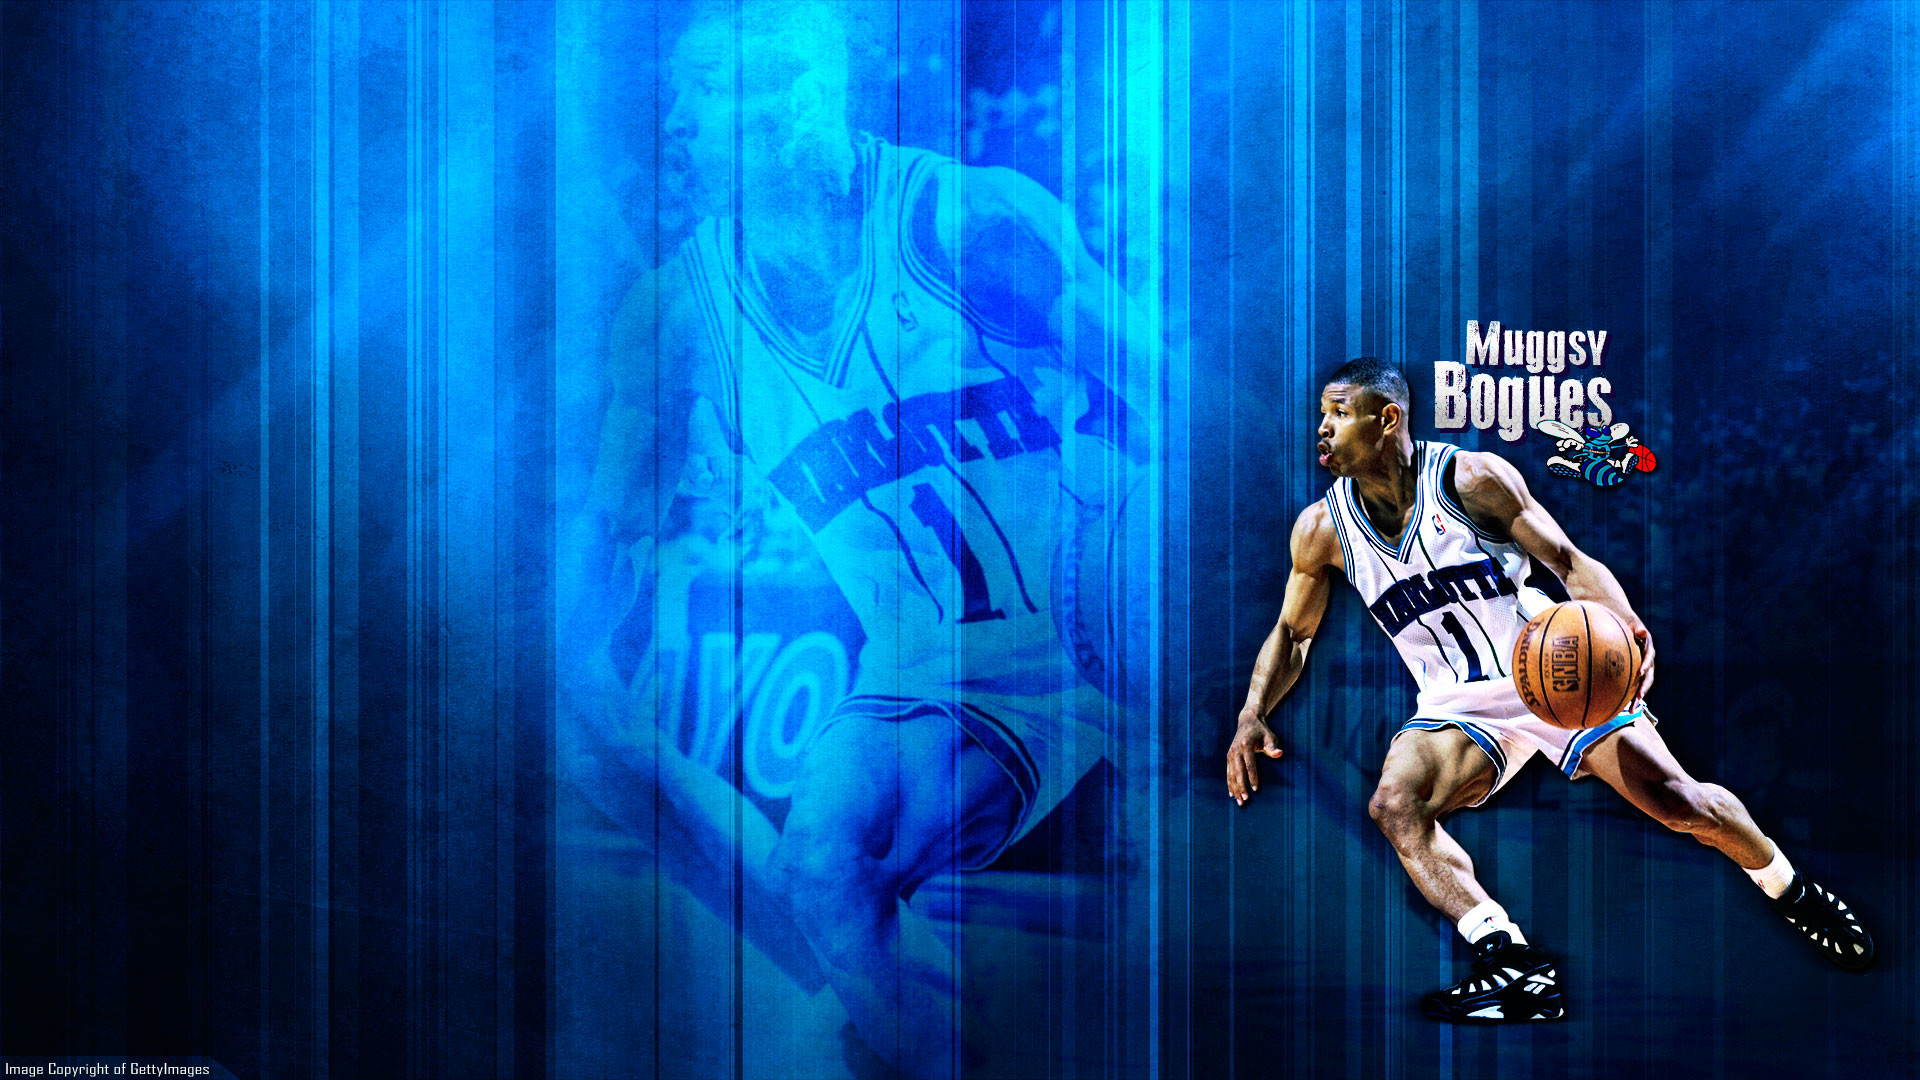 1920x1080 Charlotte Hornets images Muggsy Bogues Hornets Wallpaper HD wallpaper and  background photos